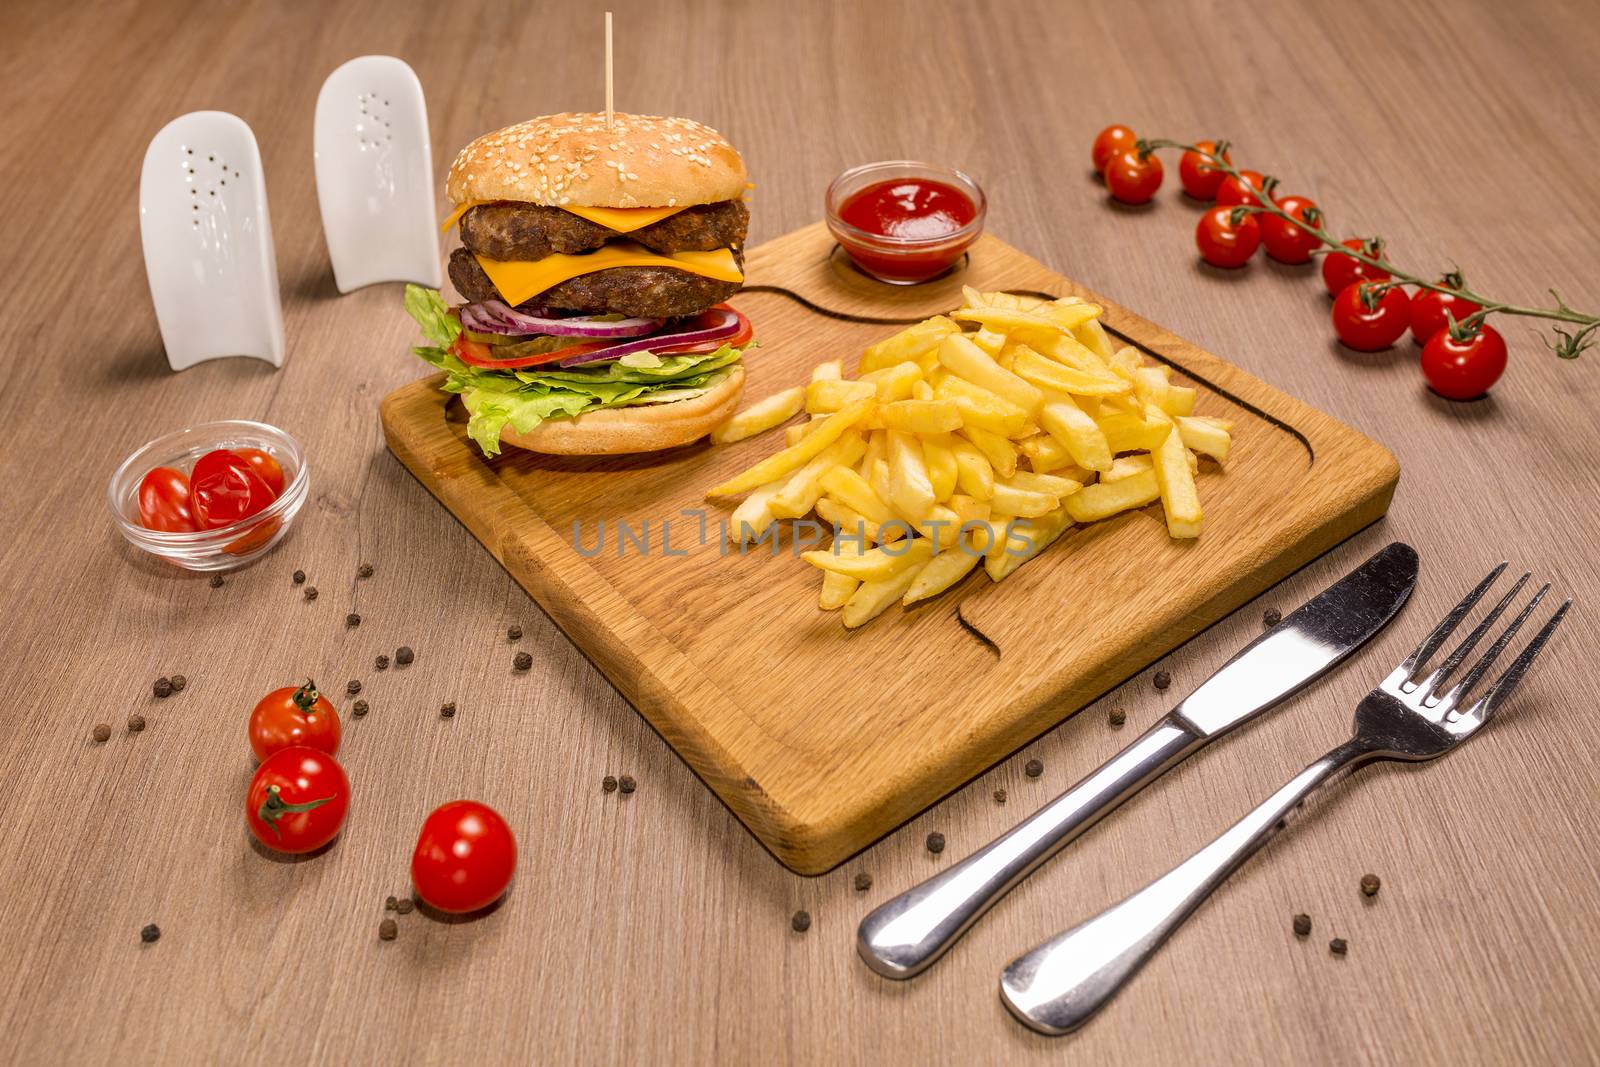 Double veal cheeseburger a wooden board. ketchup by 977_ReX_977